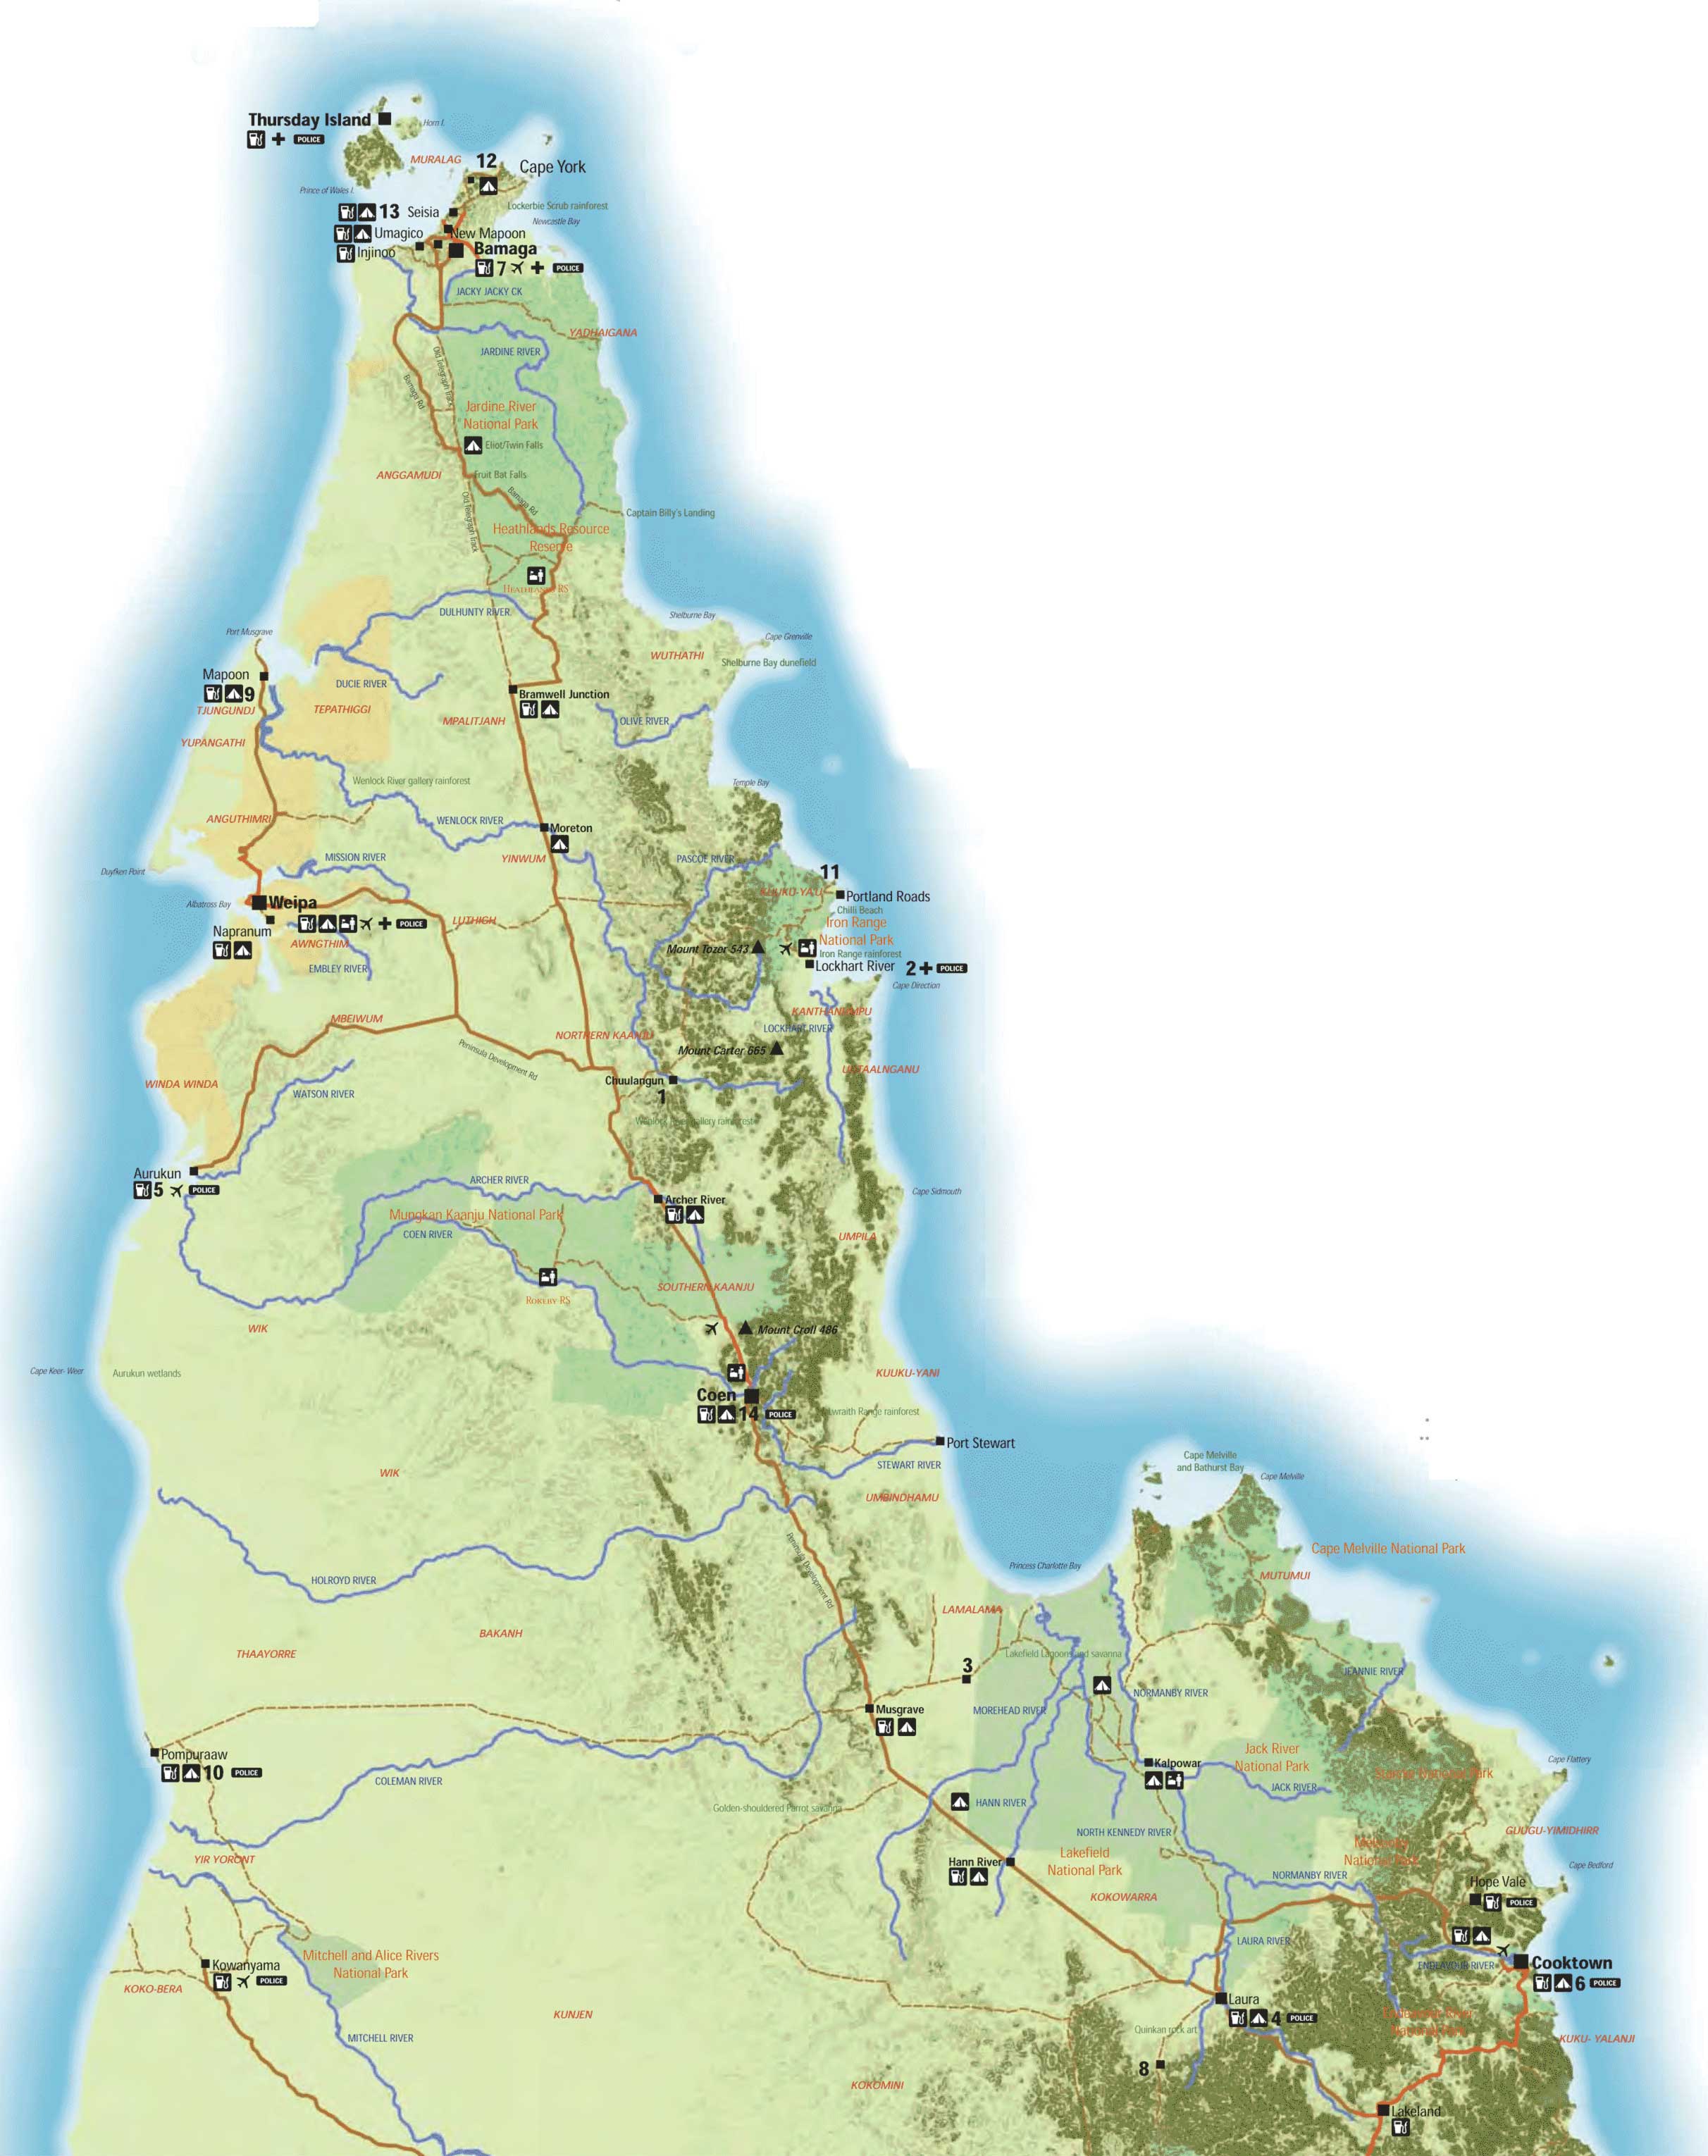 Cape York Peninsula Information - Bungie Helicopters